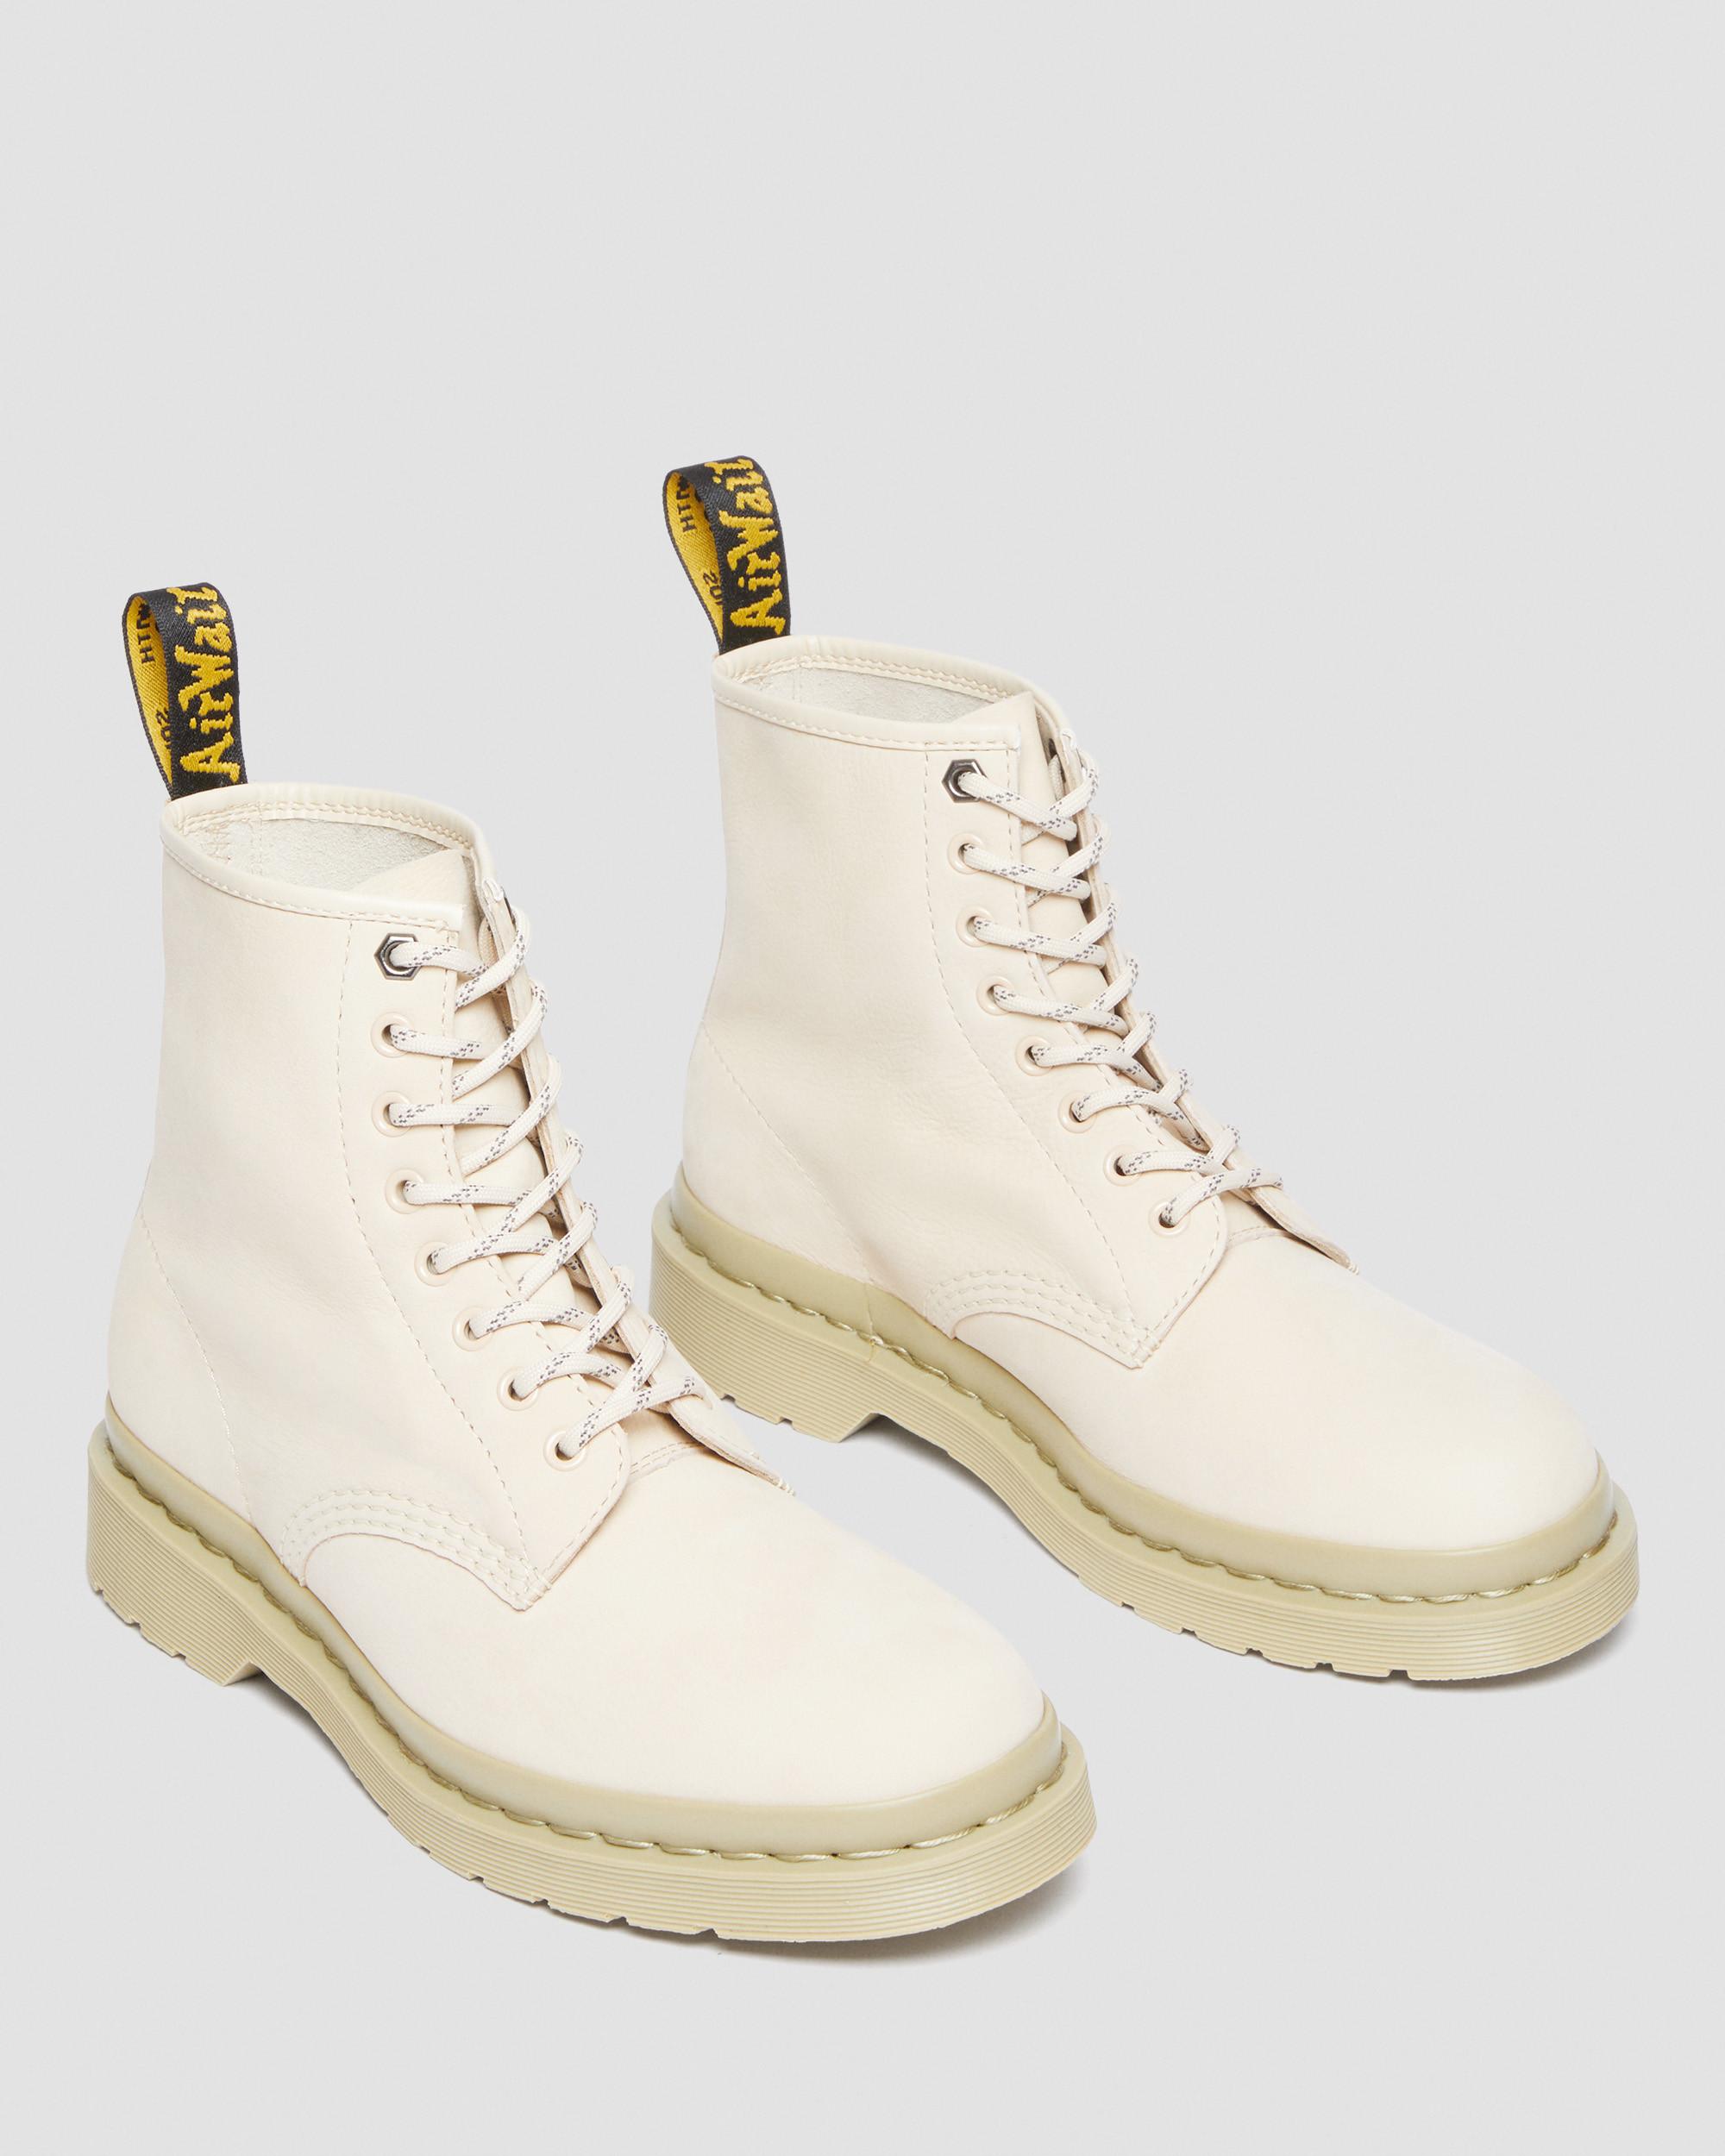 1460 Milled Nubuck Water-Resistant Leather Boots